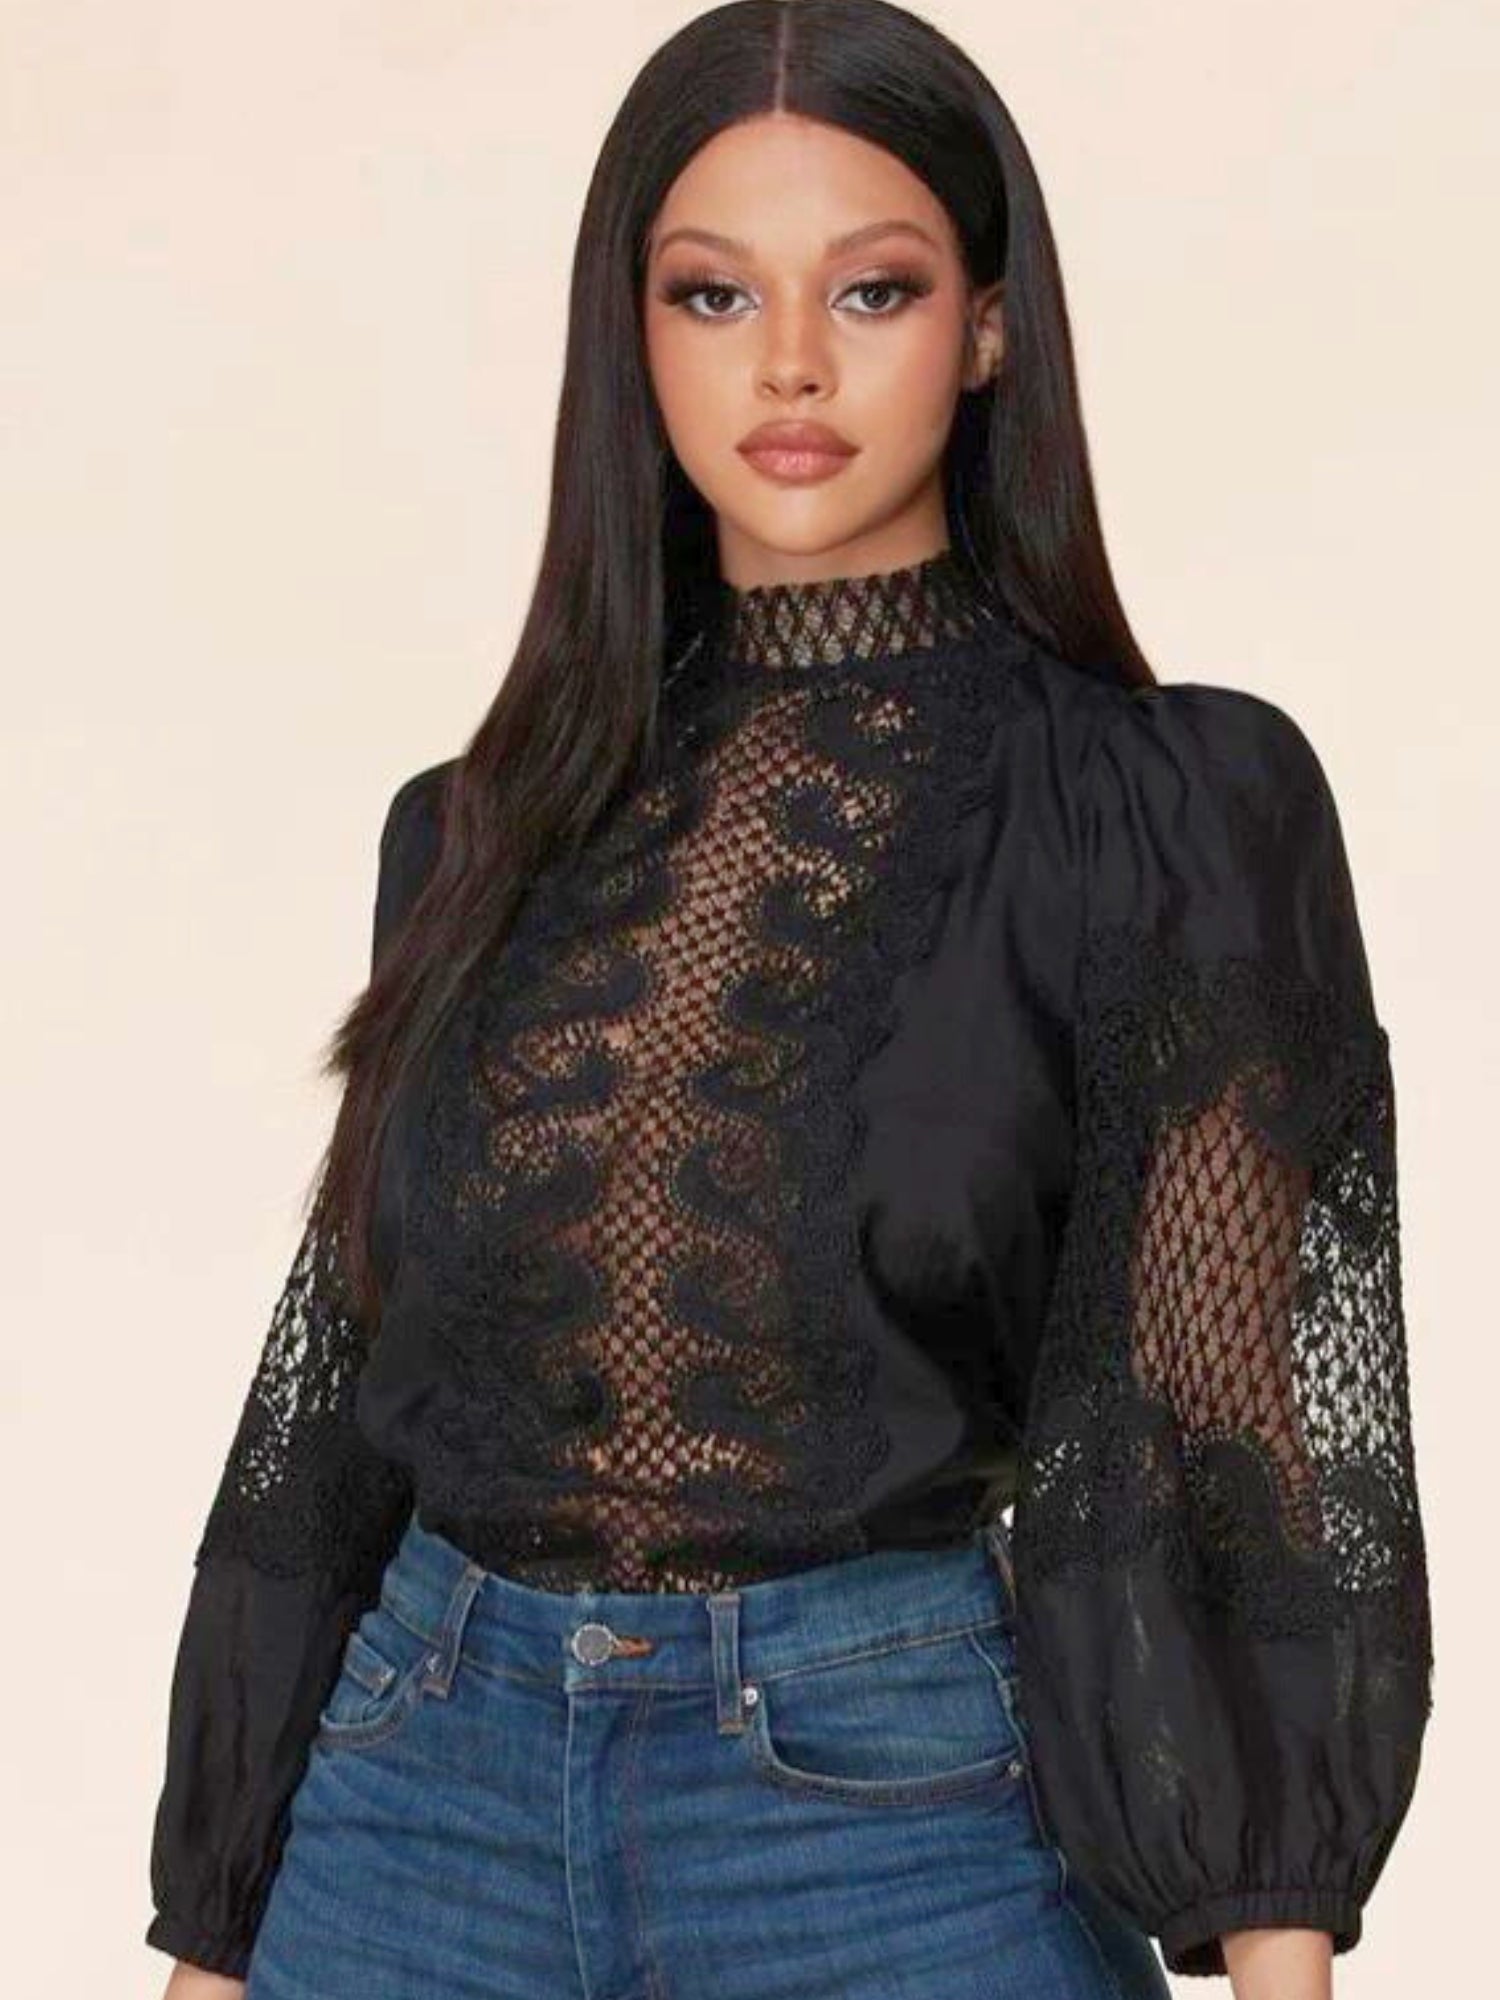 The Hocus Pocus Long-Sleeved Blouse - The Hocus Pocus Long-Sleeved Blouse is a gorgeous staple for your wardrobe. Featuring a detailed crochet design and a cute back bow, this top is sure to become a firm favorite in your collection. - Ivory Sheep Collect